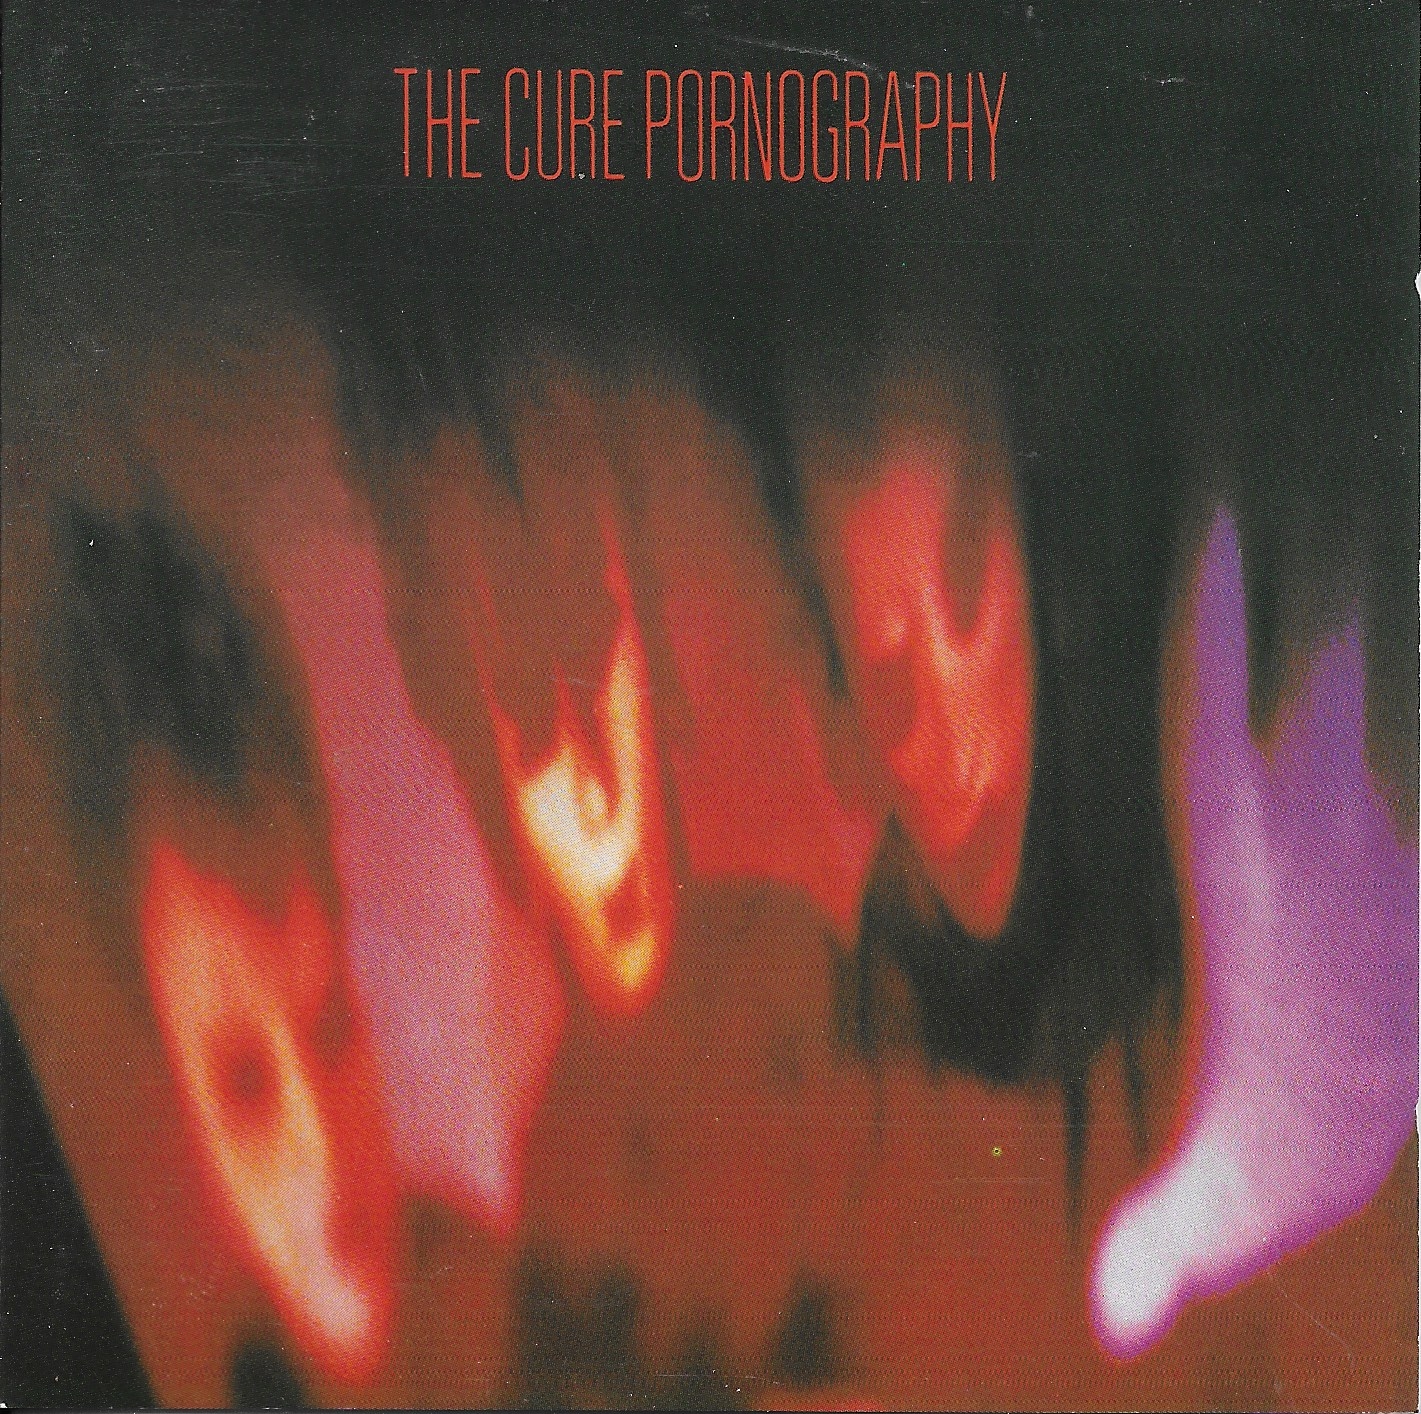 Picture of Pornography by artist The Cure 